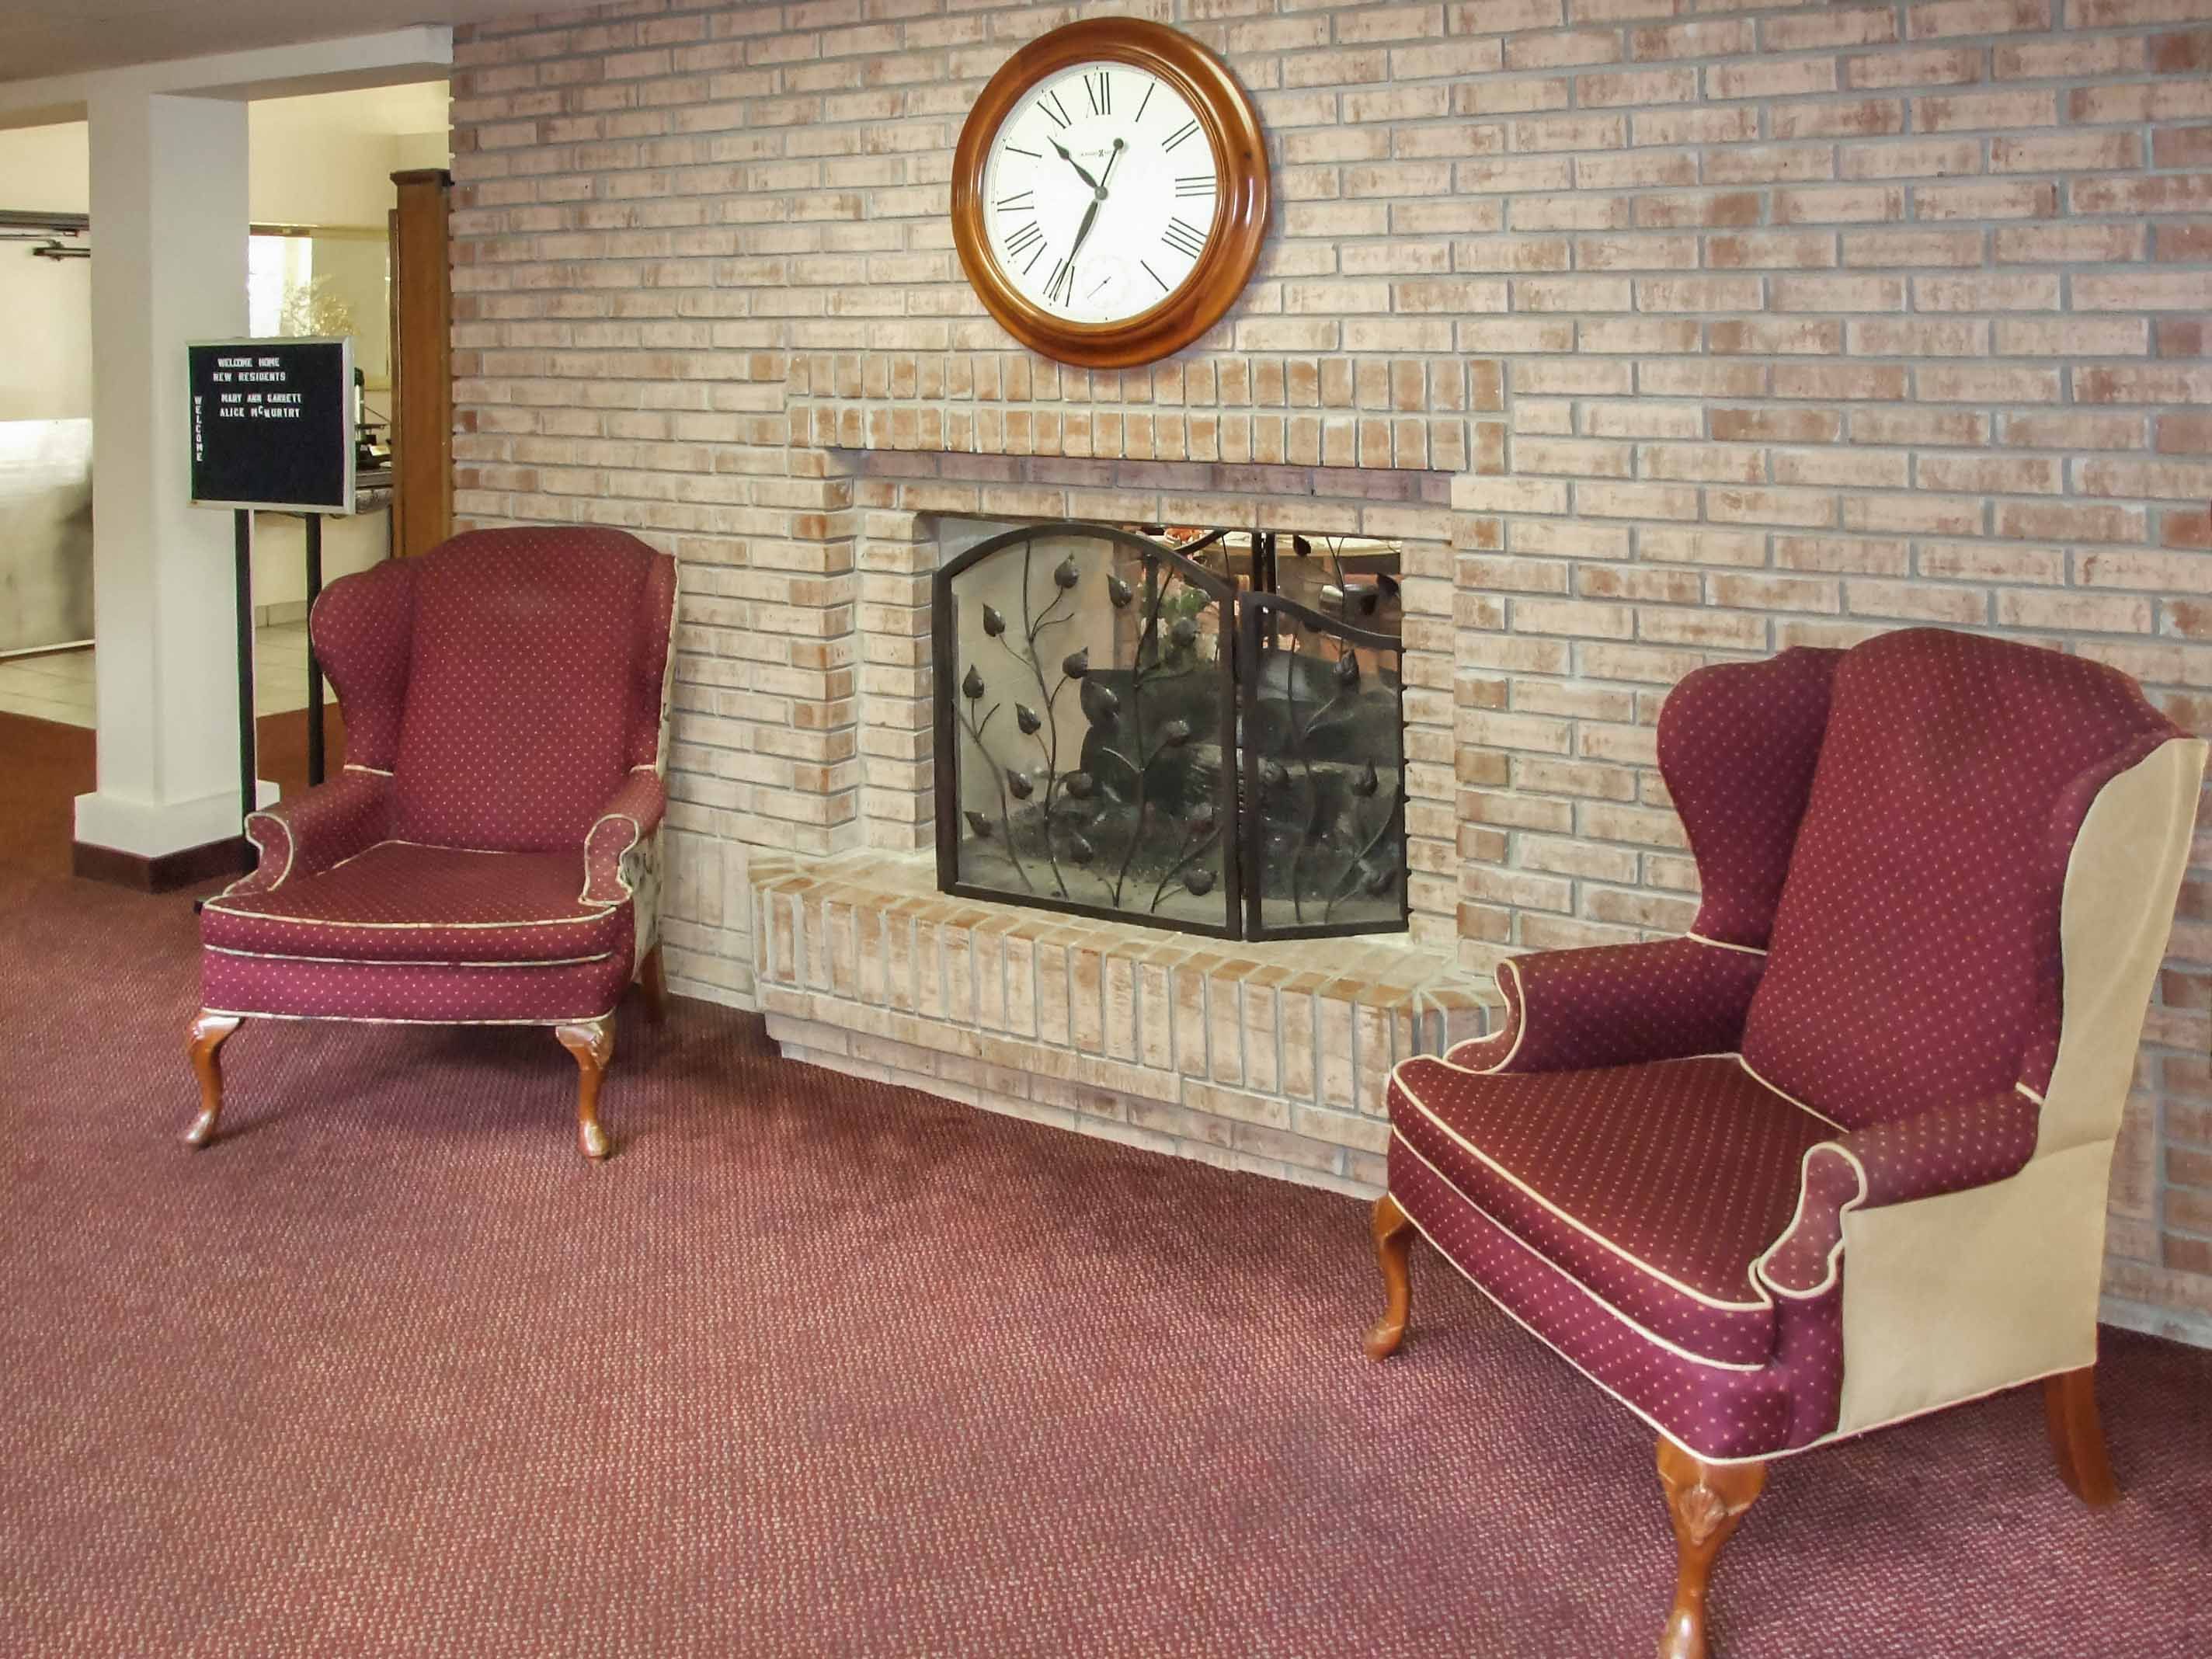 Holiday scene at Willow Park senior living community featuring a cozy living room with furniture and clock.